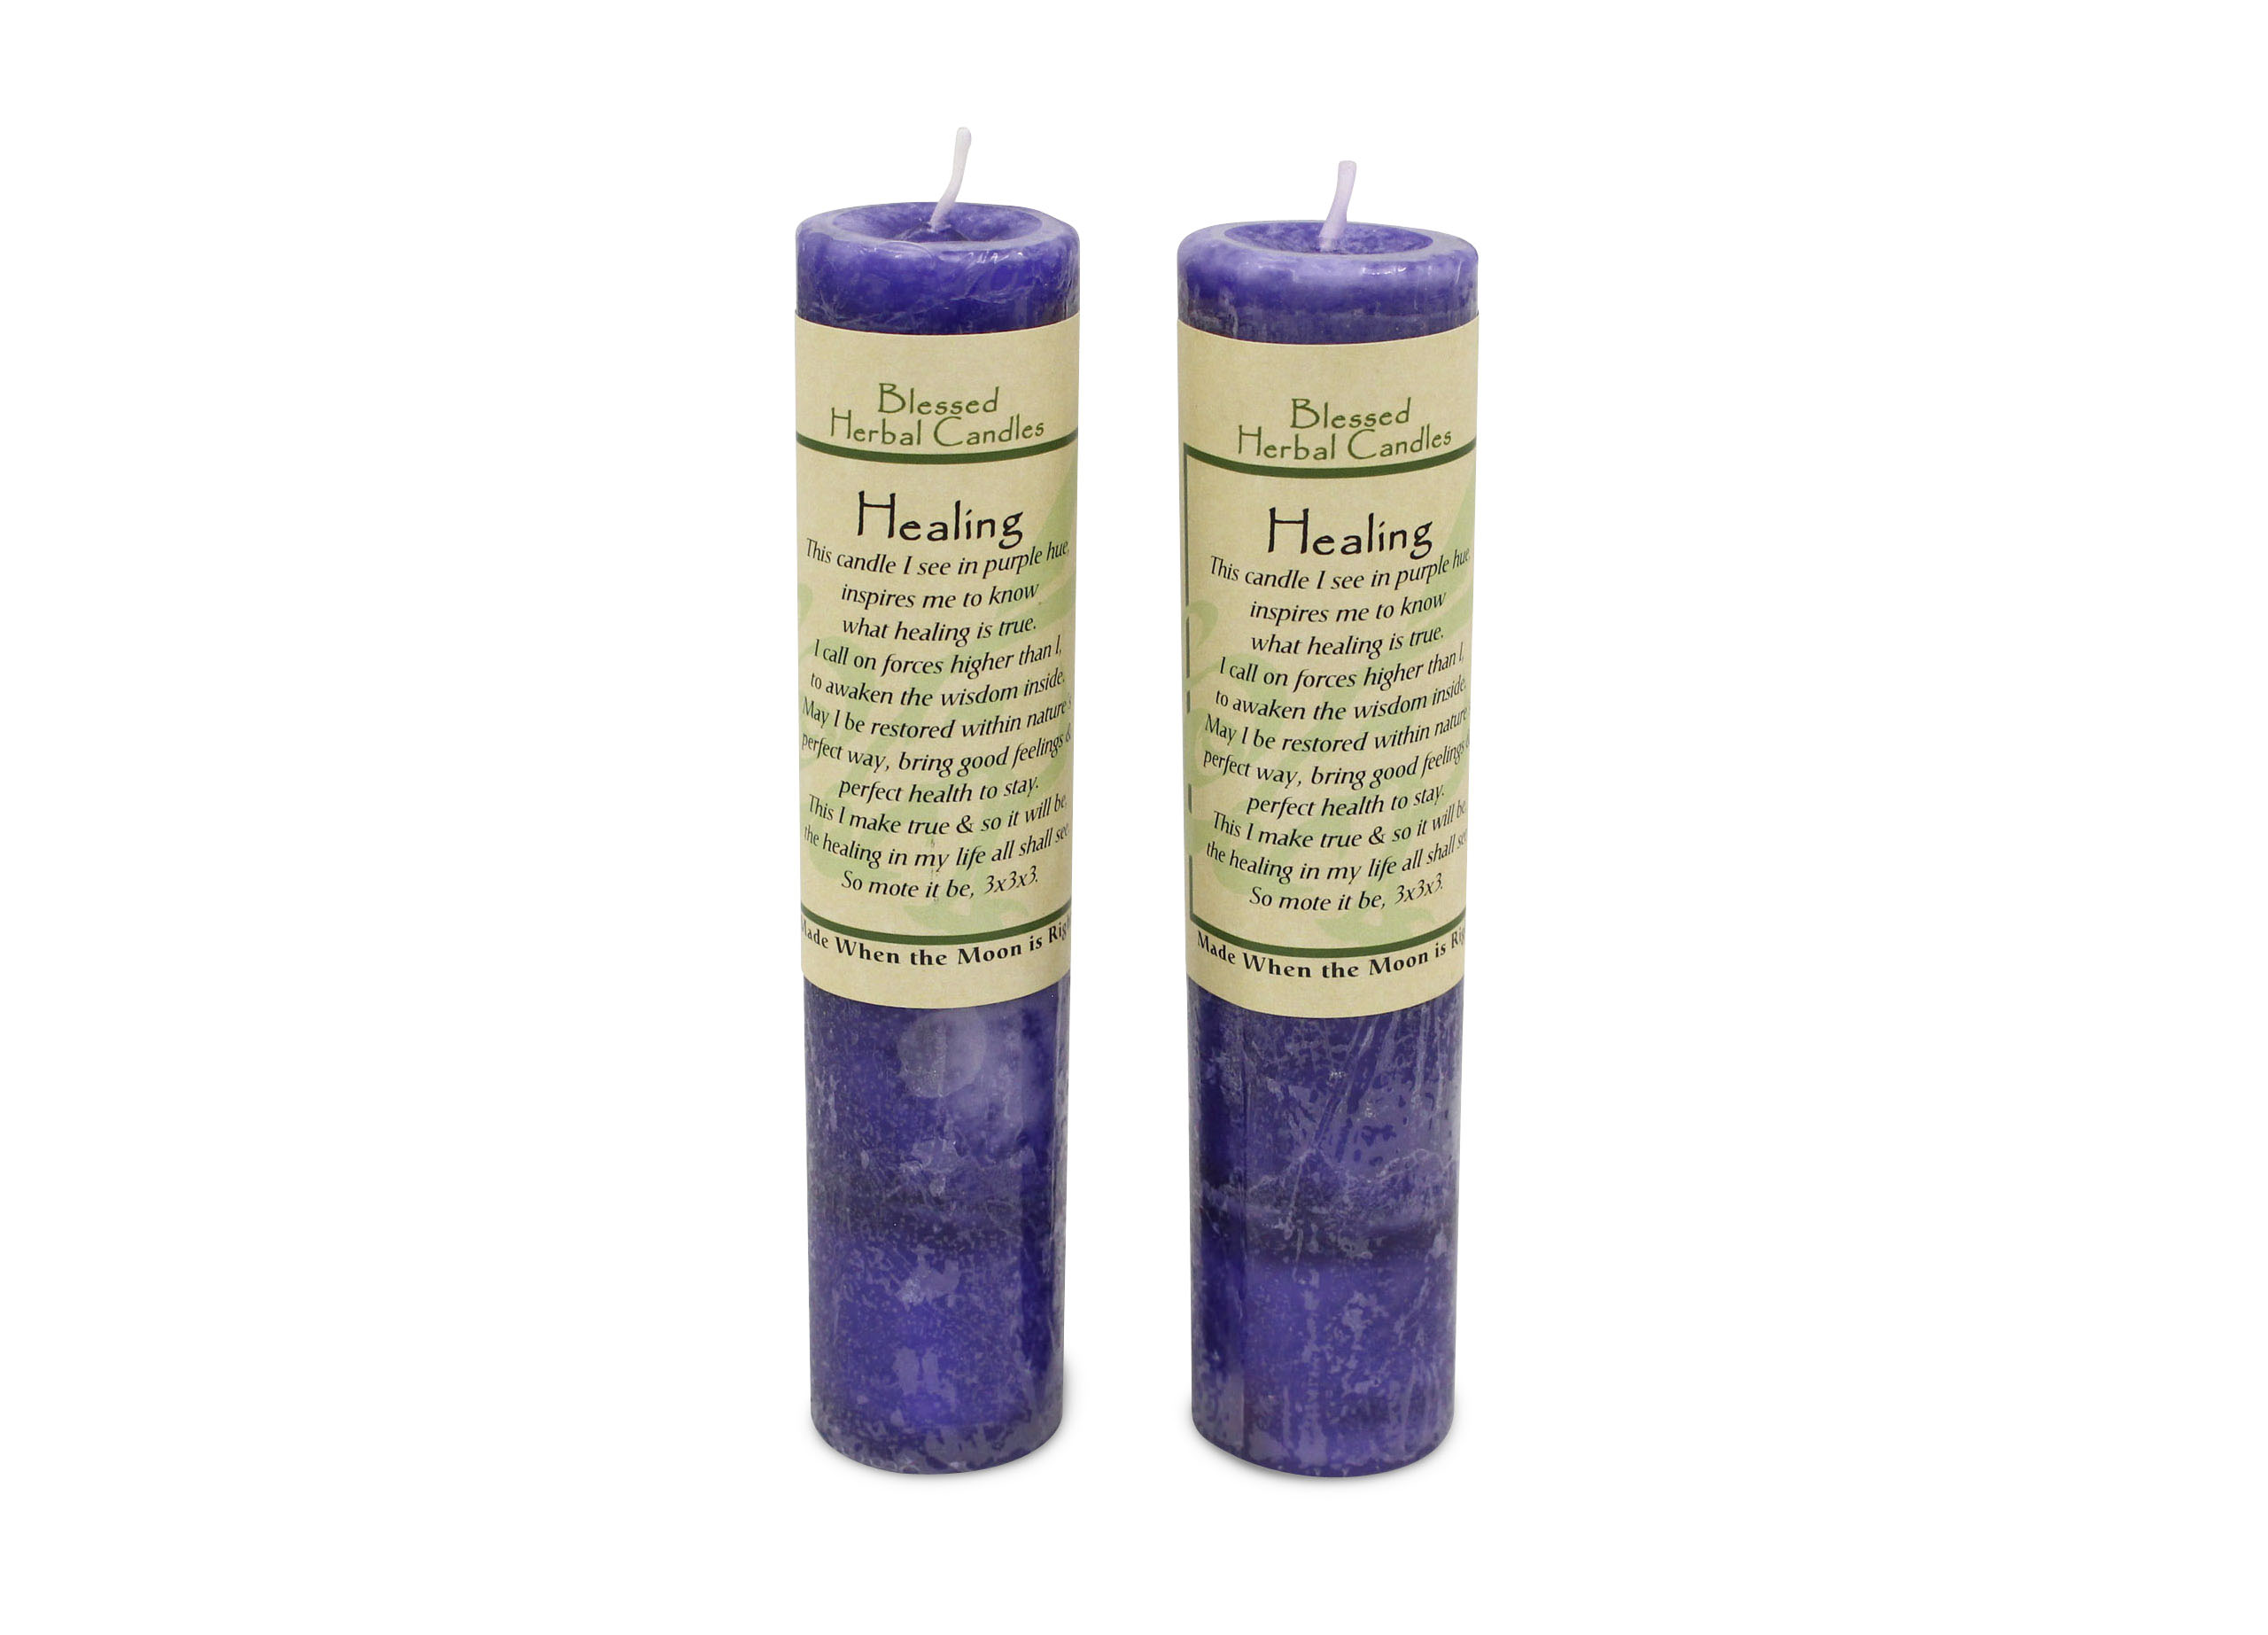 Healing Spell Candle - Crystal Dreams